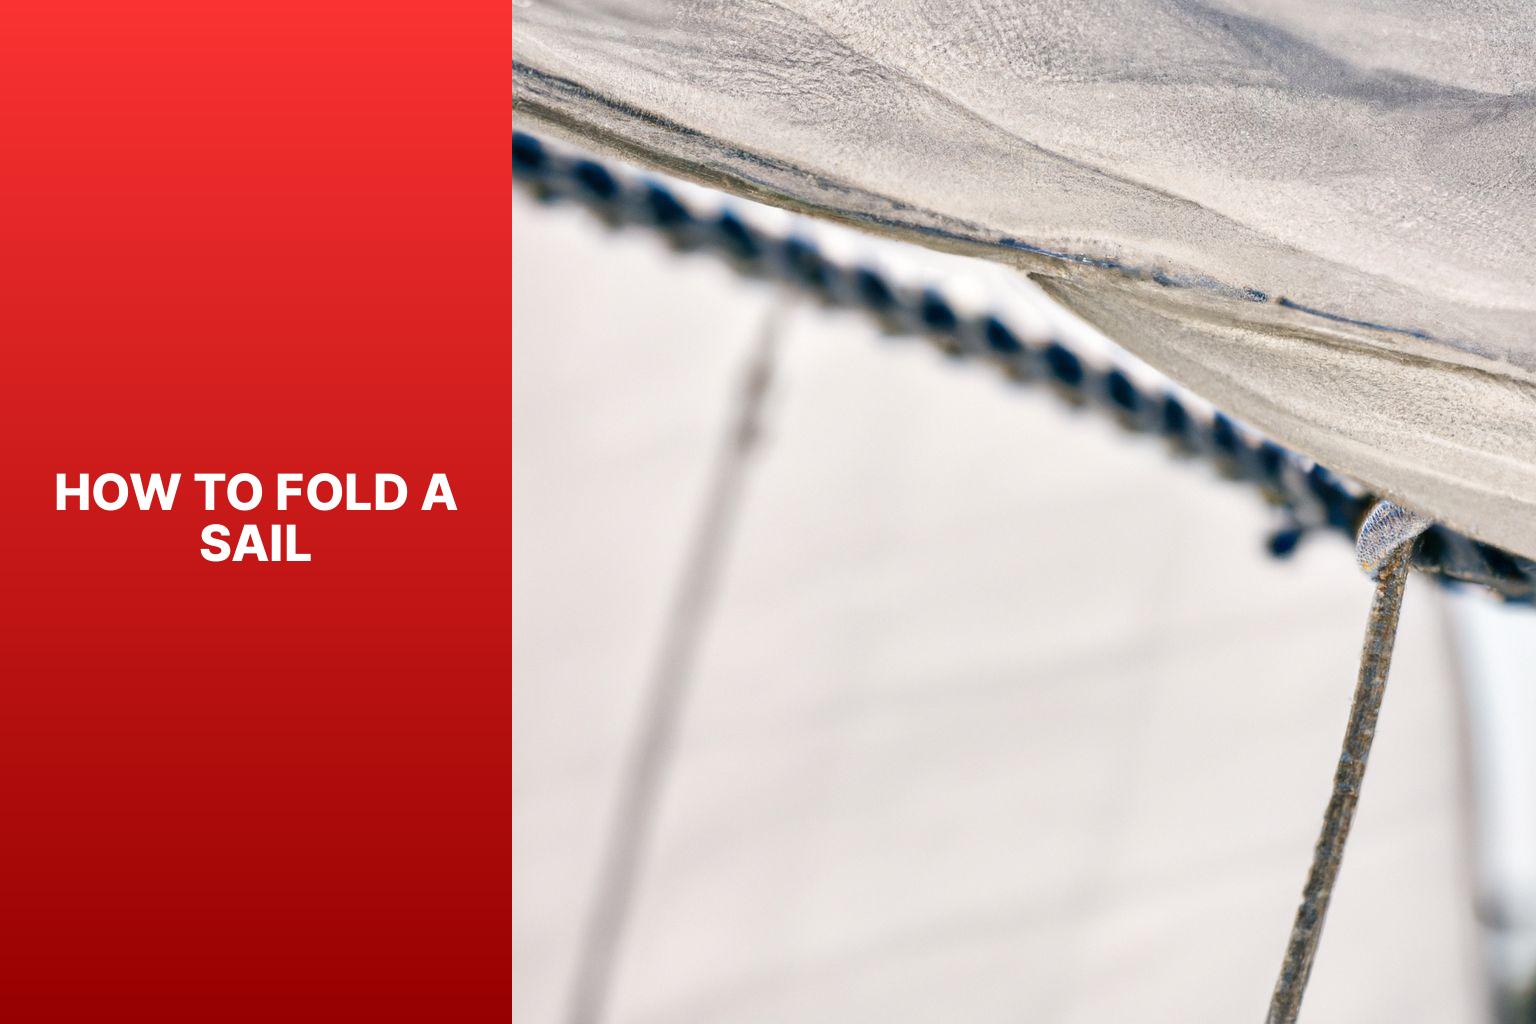 Learn the Step-by-Step Process of Folding a Sail for Easy Storage